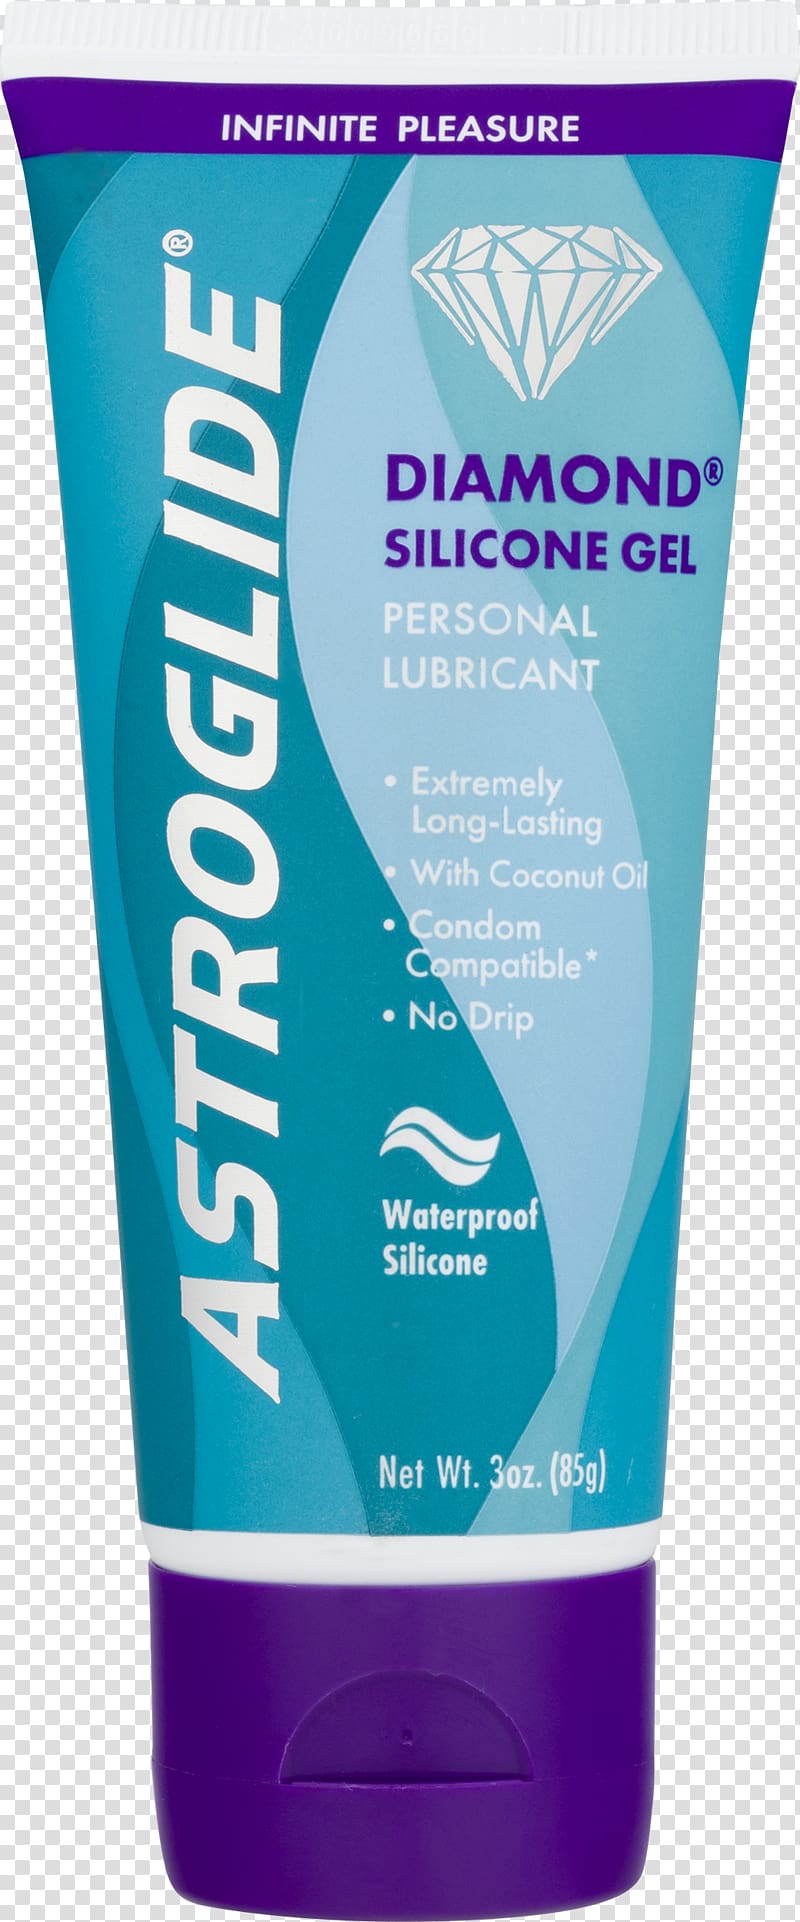 Personal Lubricants & Creams Silicone Gel Astroglide, others transparent background PNG clipart